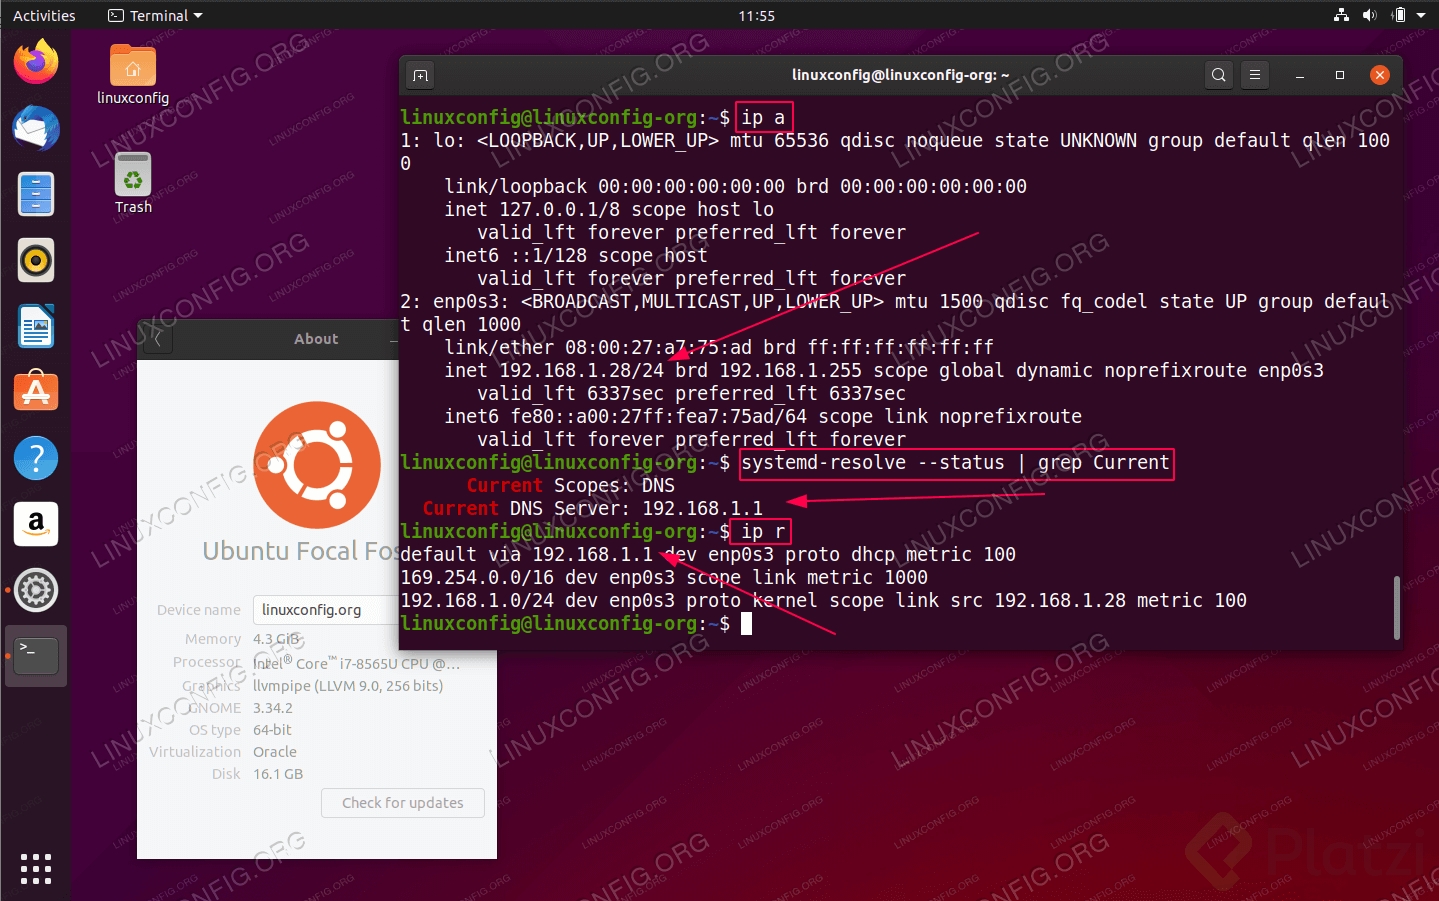 02-how-to-find-my-ip-address-on-ubuntu-20-04-focal-fossa-linux.png